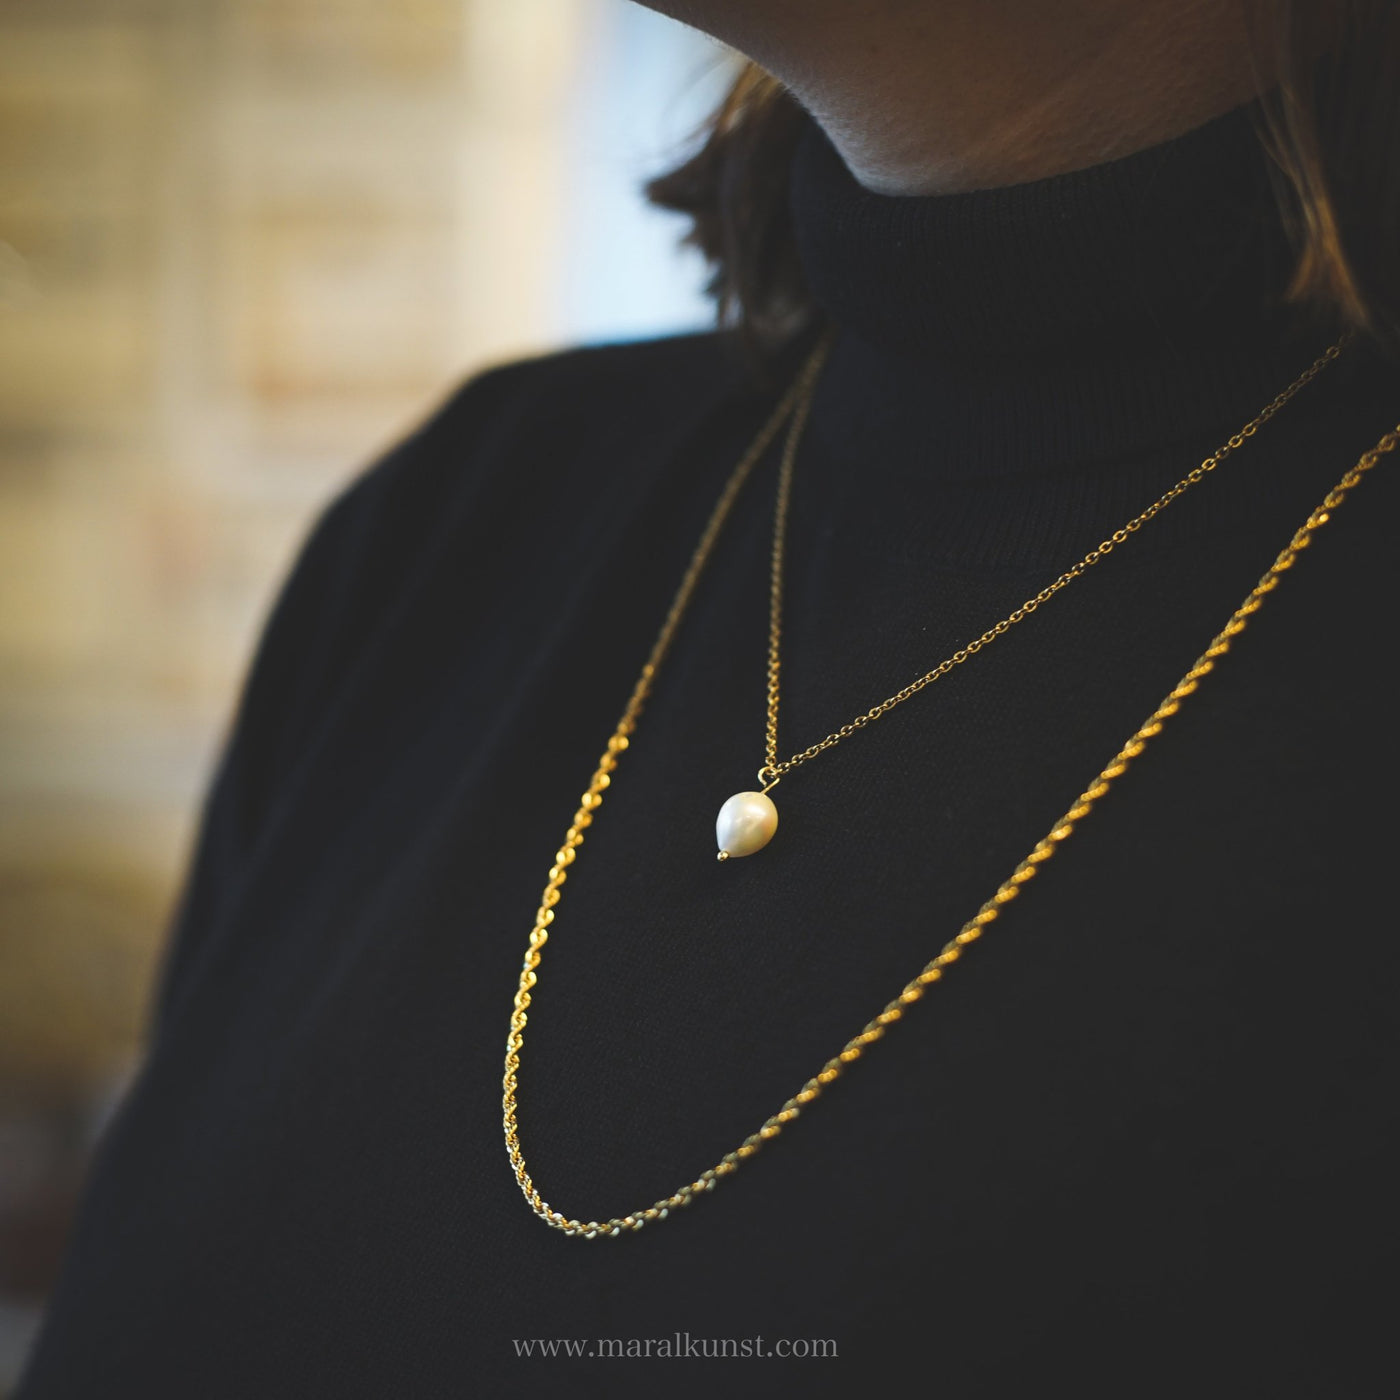 Tear Drop Pearl Necklace in Gold - Maral Kunst Jewelry